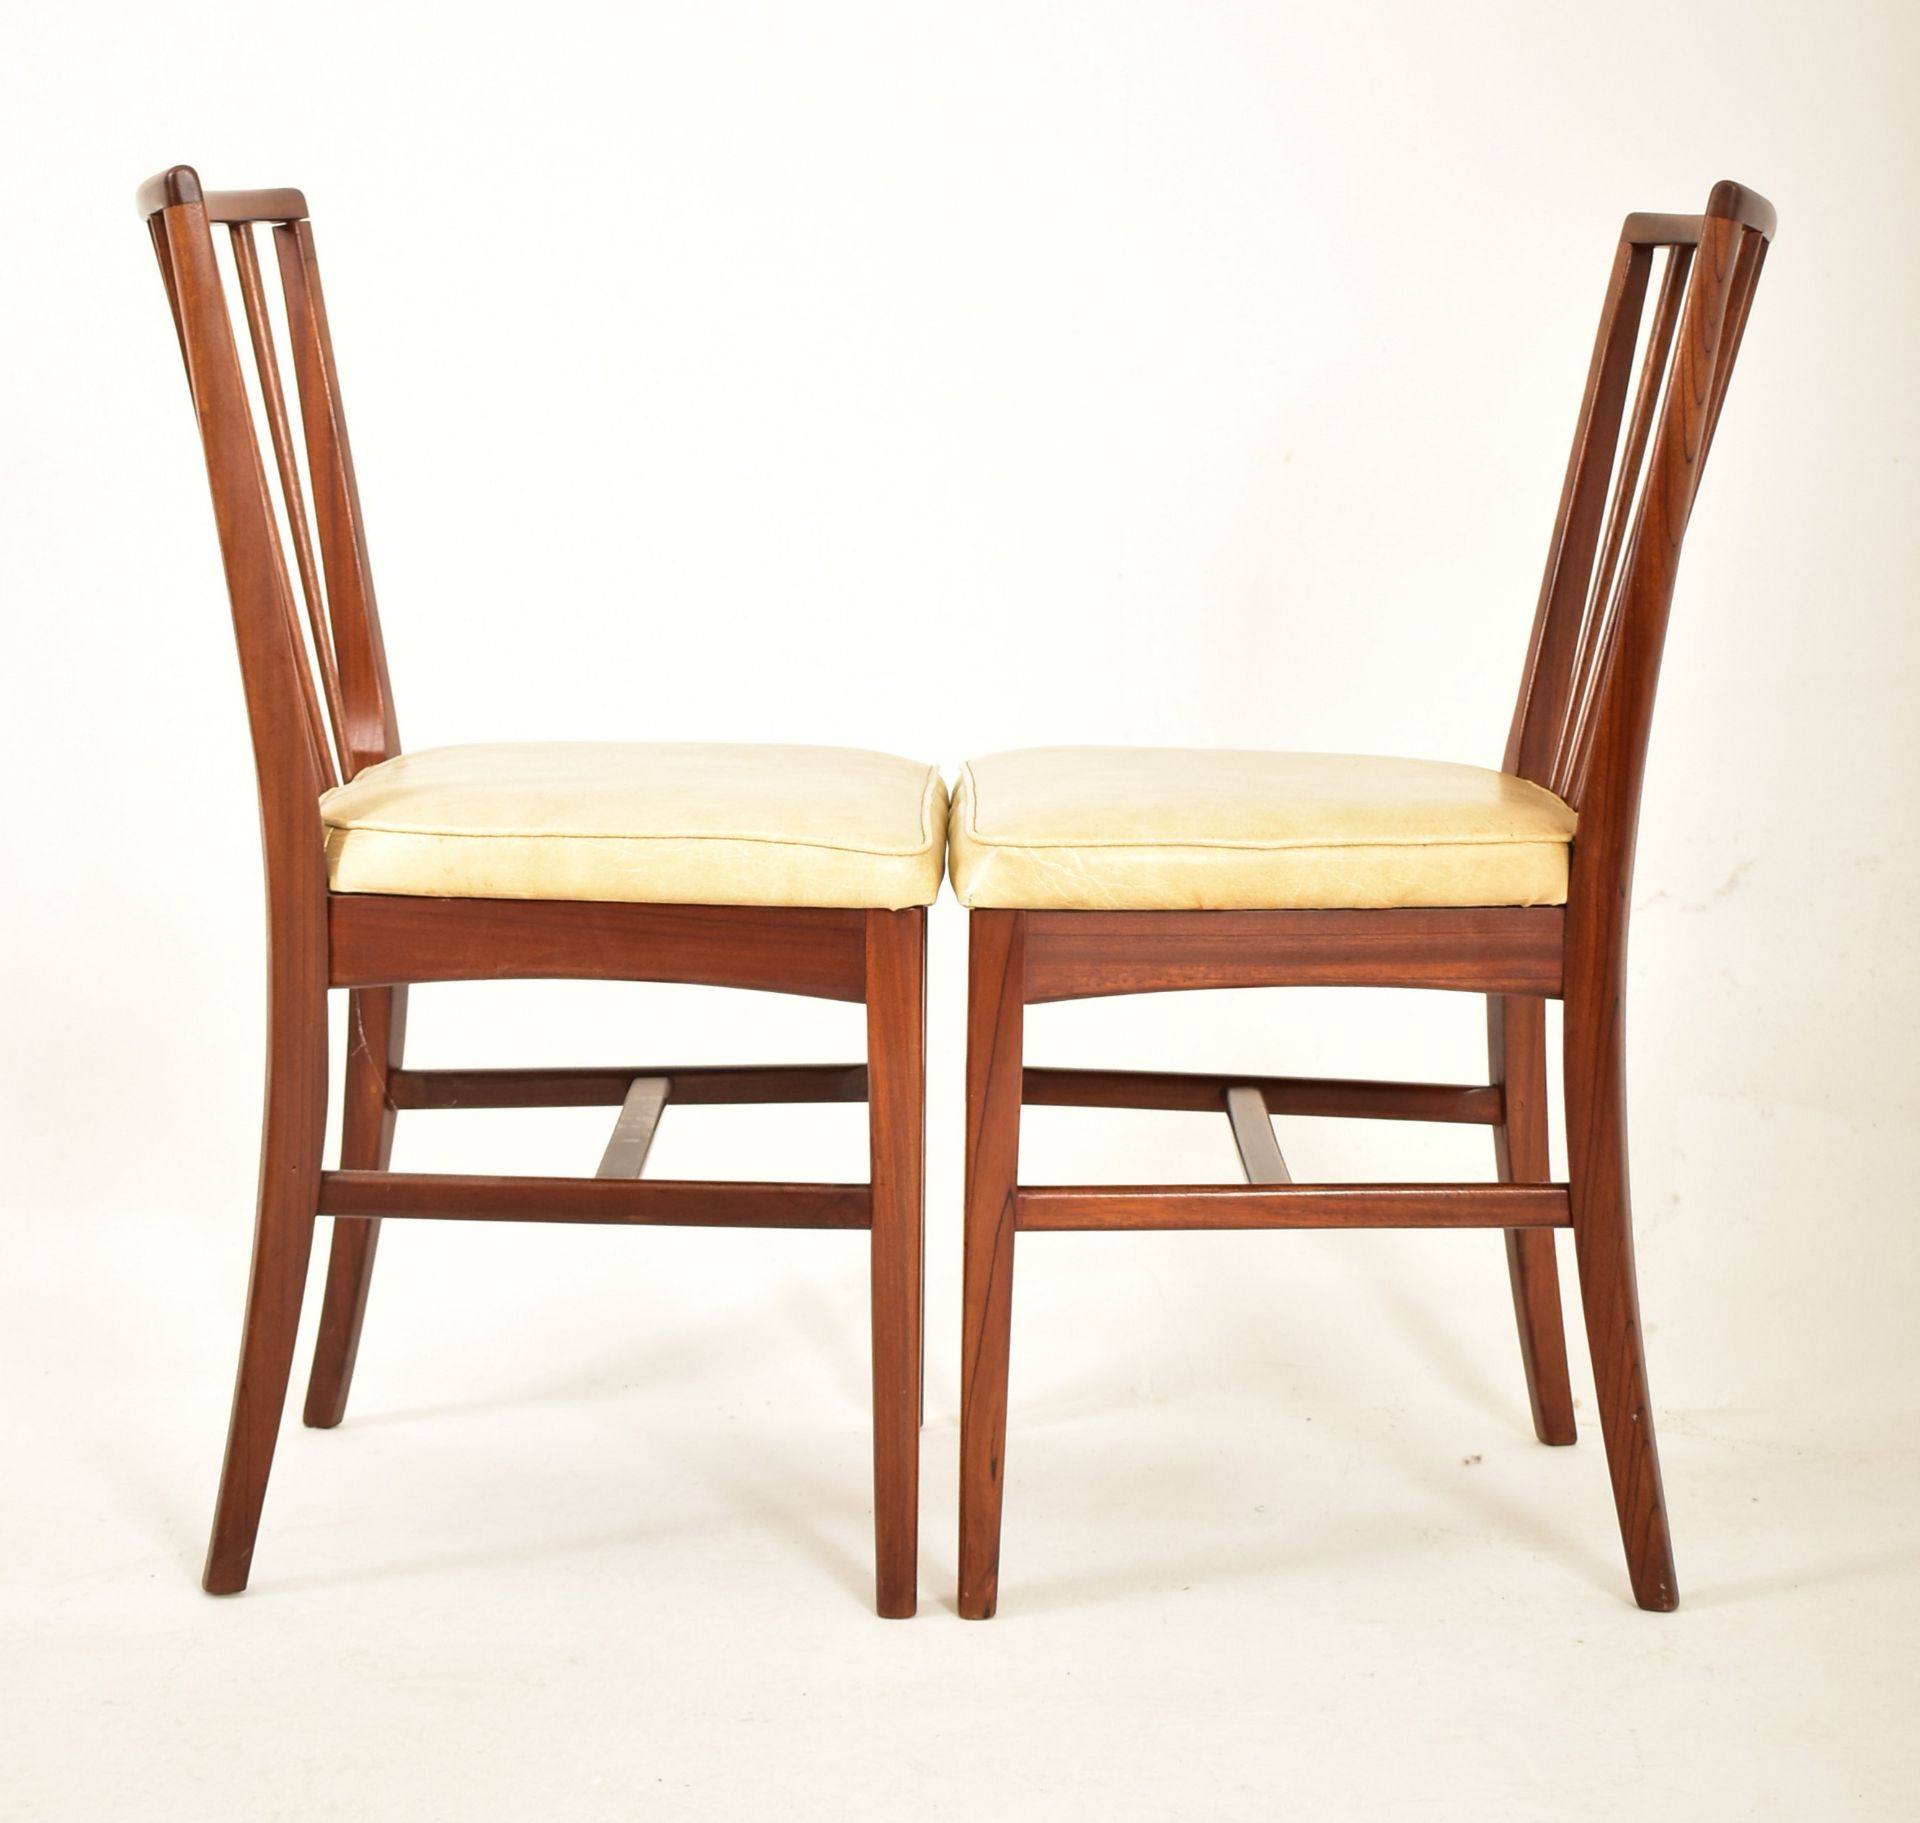 YOUNGERS - MID CENTURY TEAK DINING TABLE AND SIX CHAIRS - Image 8 of 9